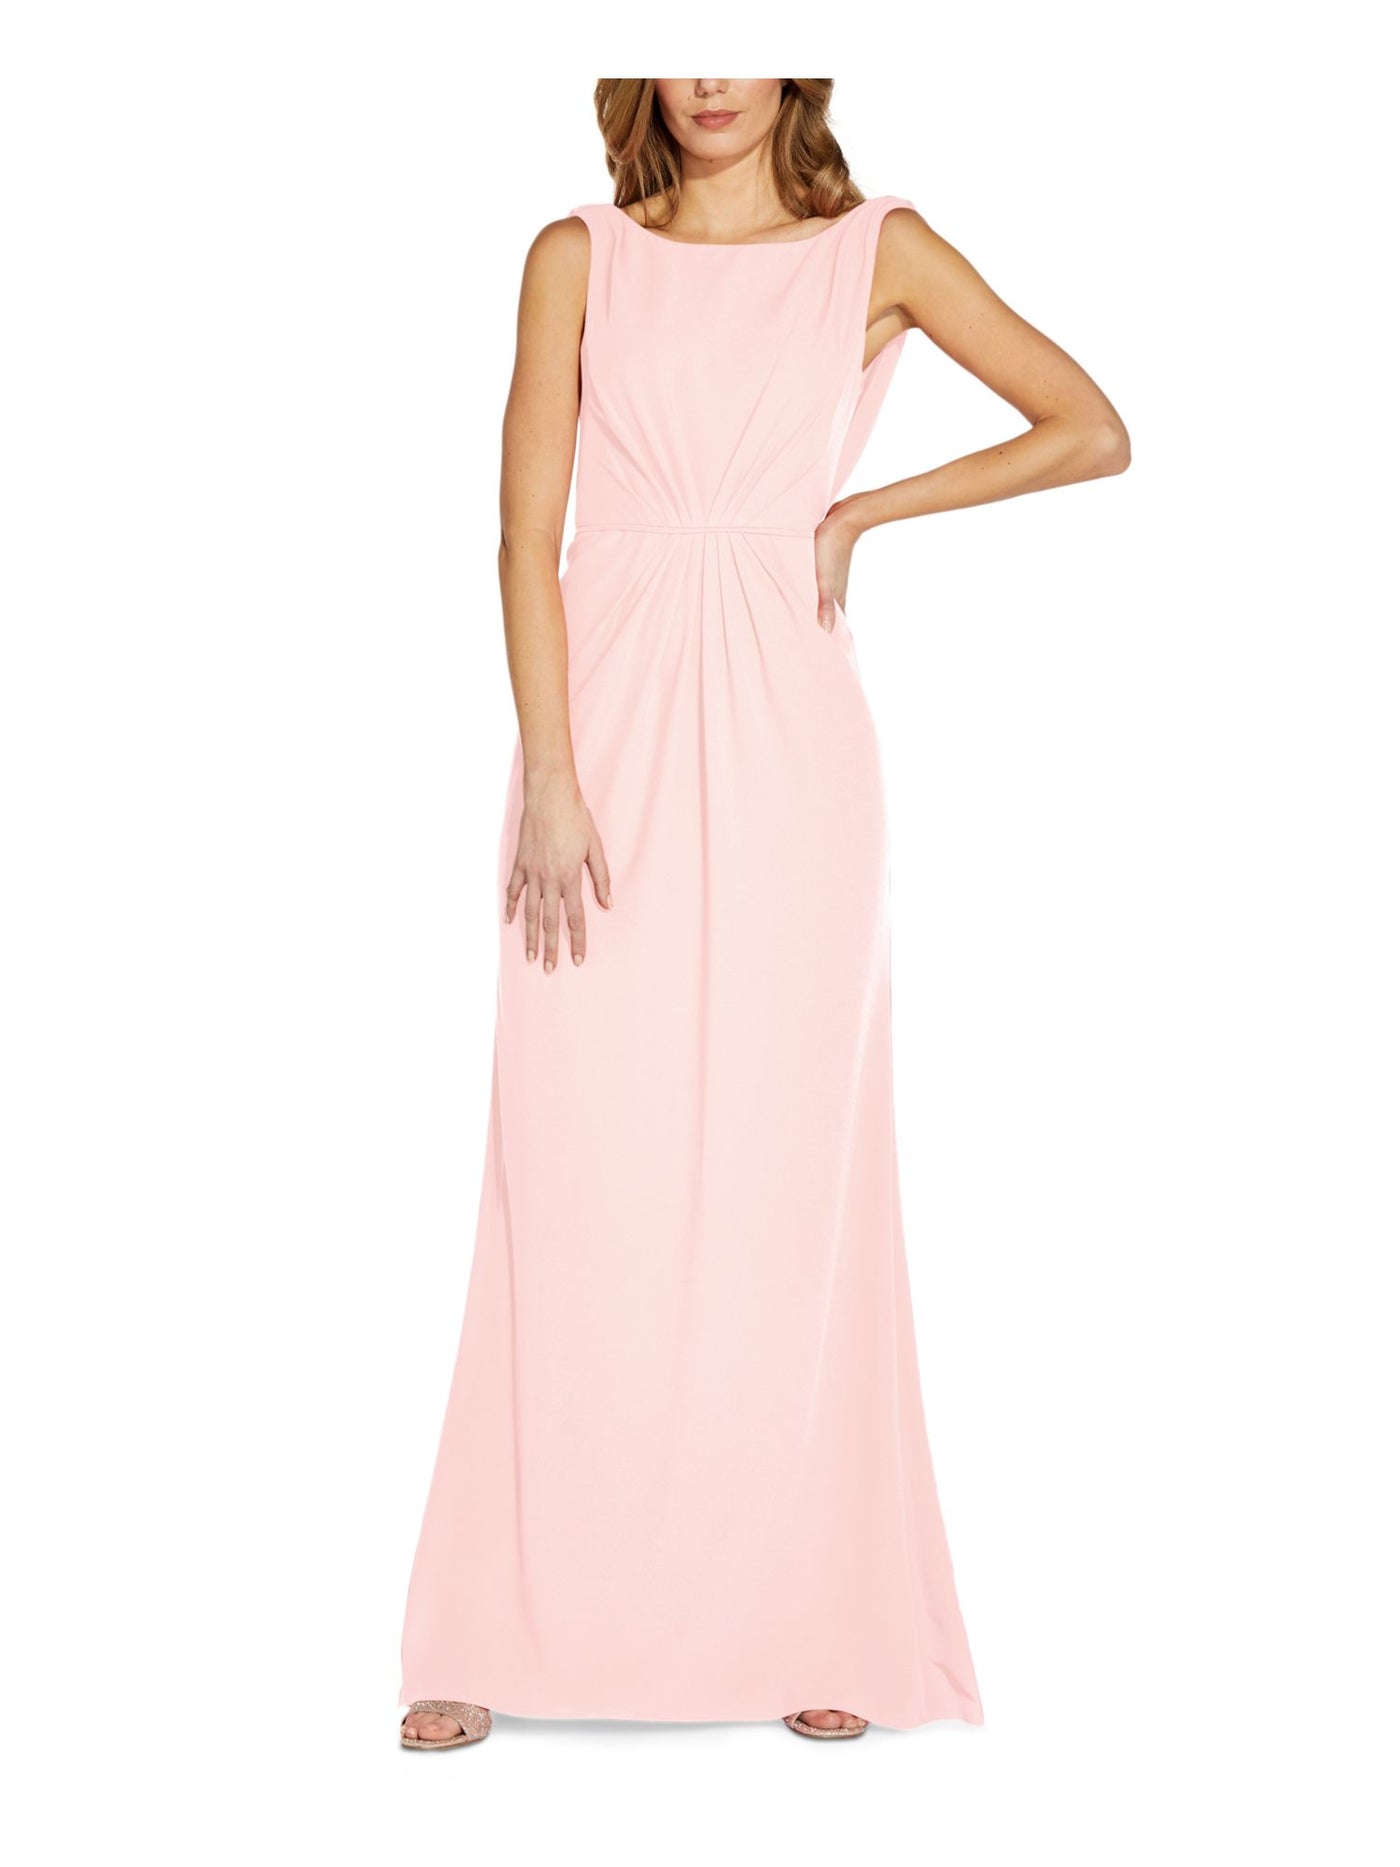 ADRIANNA PAPELL Womens Pink Pleated Zippered Drape Back Sleeveless Boat Neck Full-Length Evening Gown Dress 6